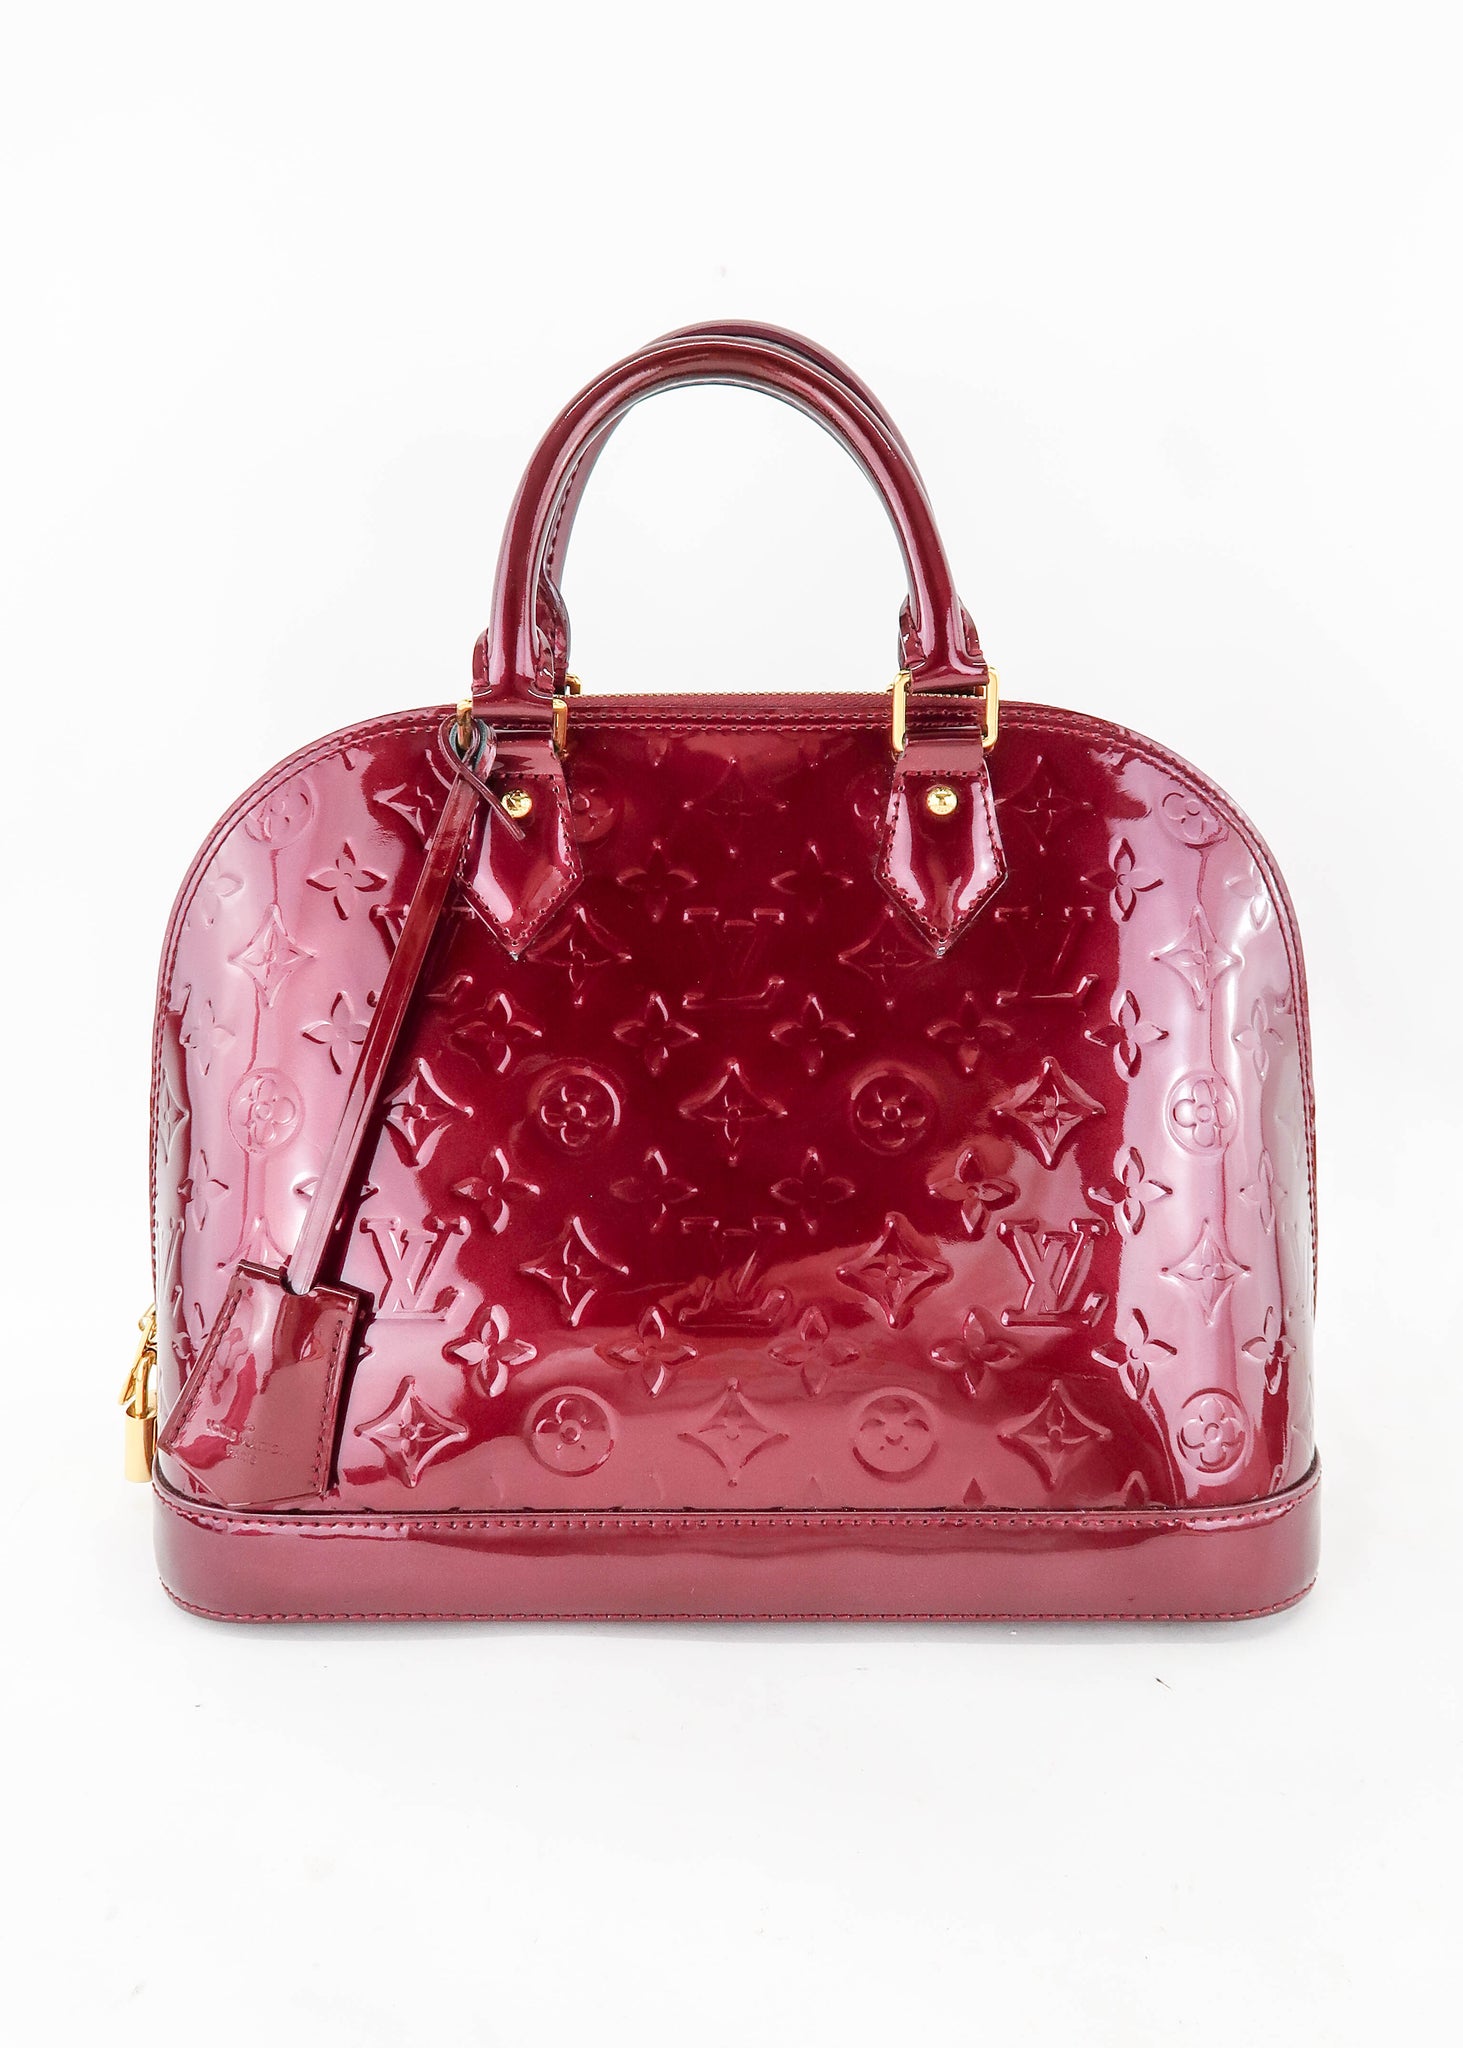 LOUIS VUITTON ALMA BB PATENT LEATHER METALLIC PINK WITH BLACK HANDLE SHW